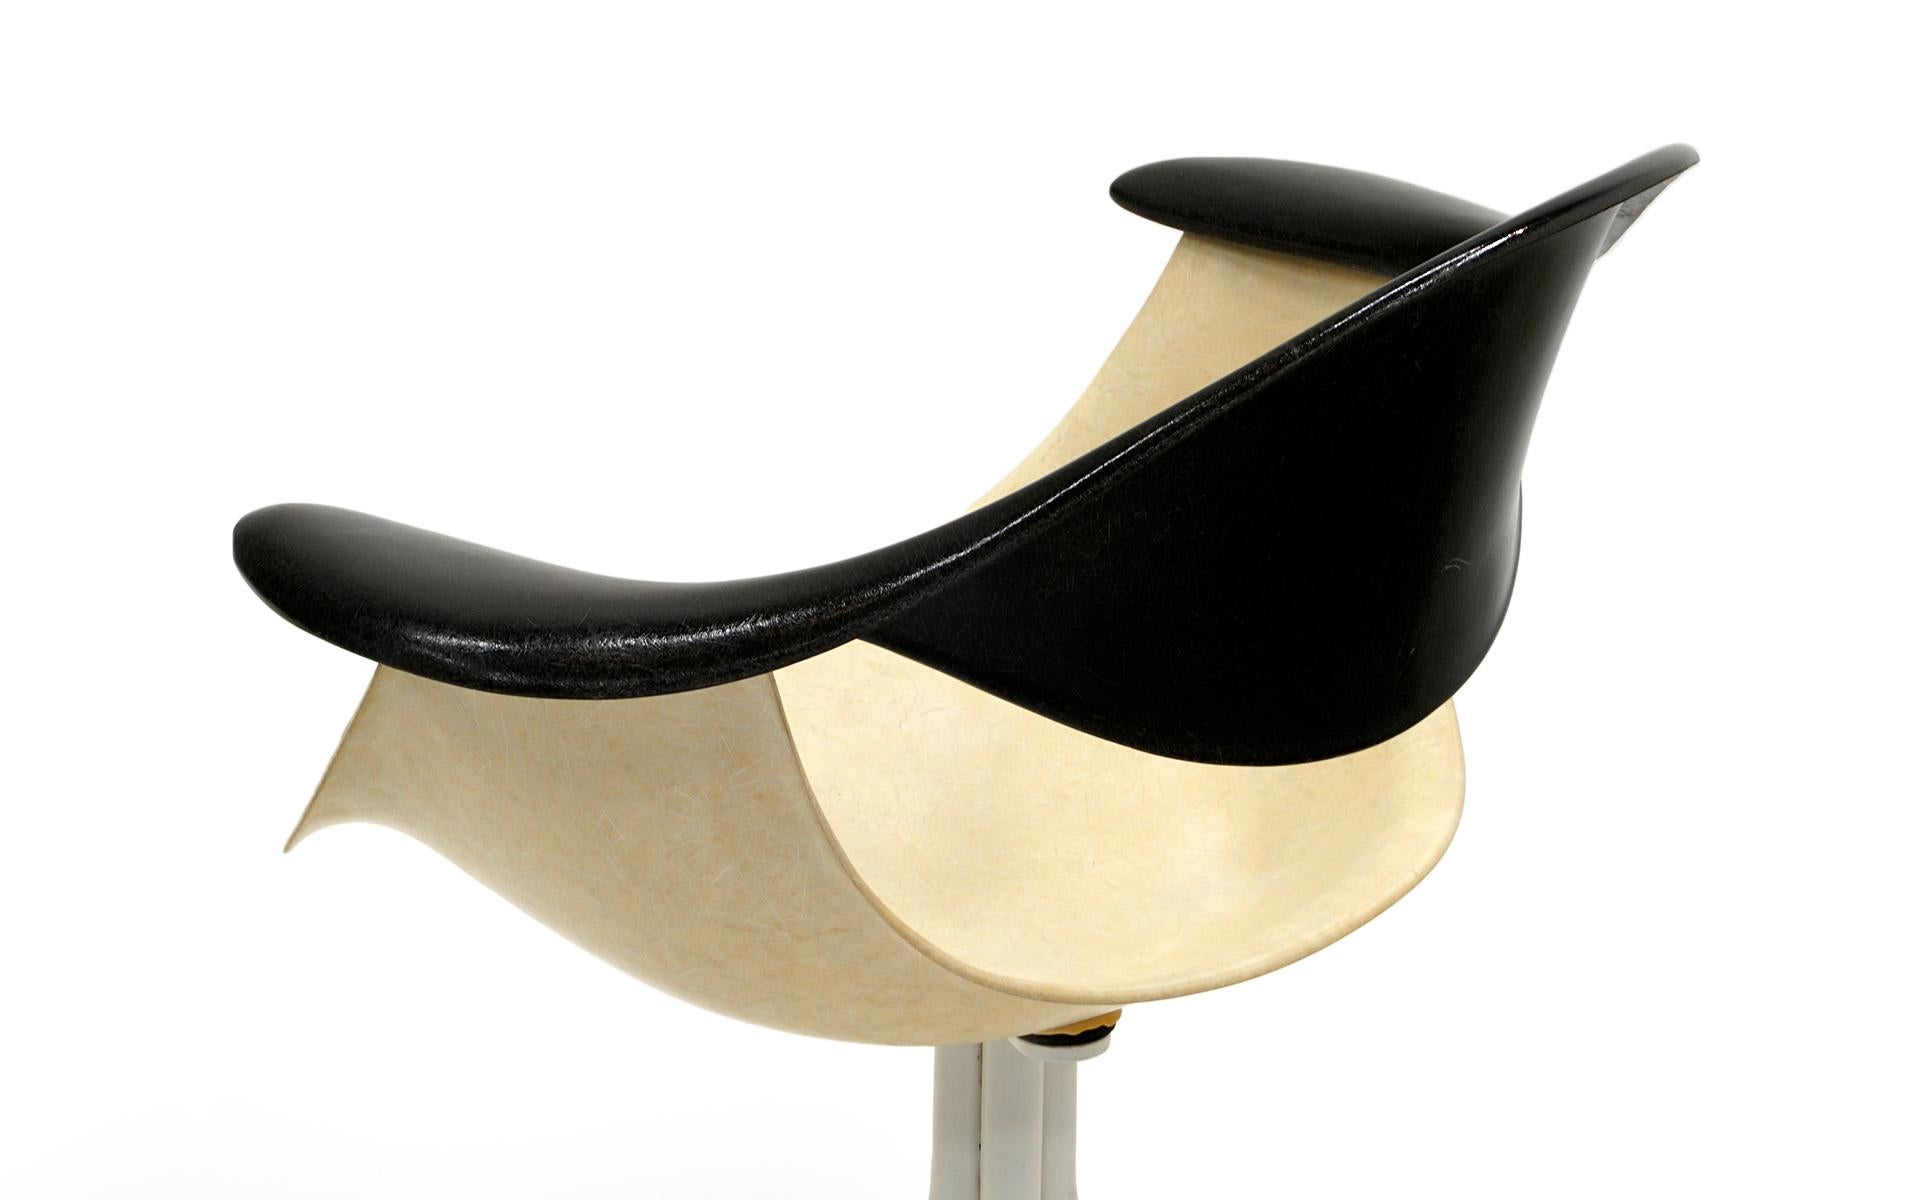 Mid-Century Modern Four Swag Leg Chairs by George Nelson, Model DAF, 1958, Original Beige and Black